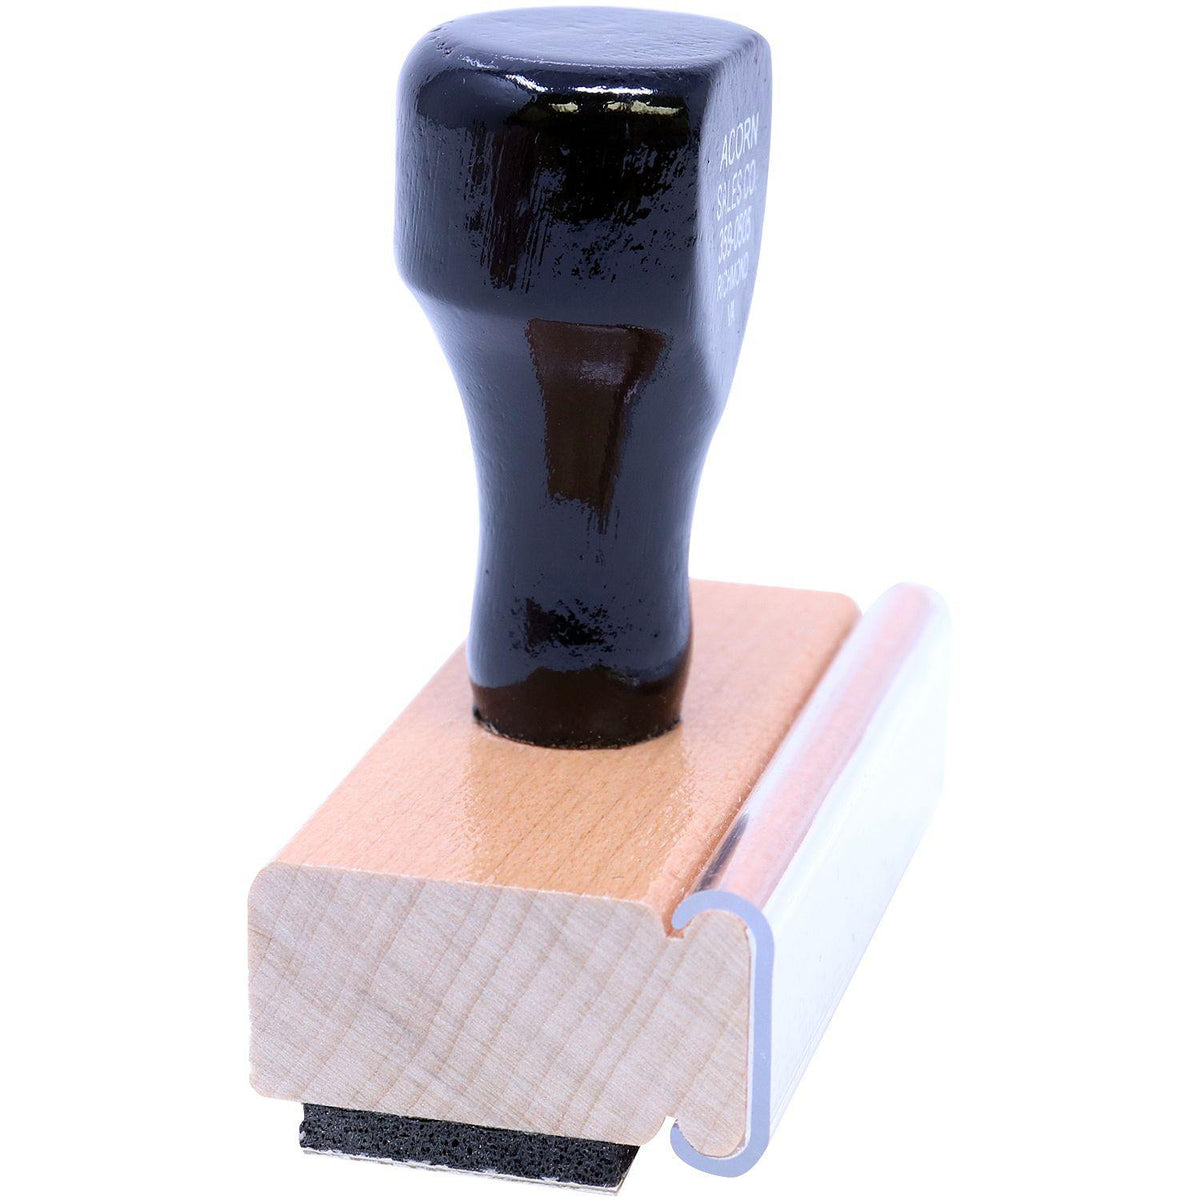 Side View of Formas Rubber Stamp at an Angle